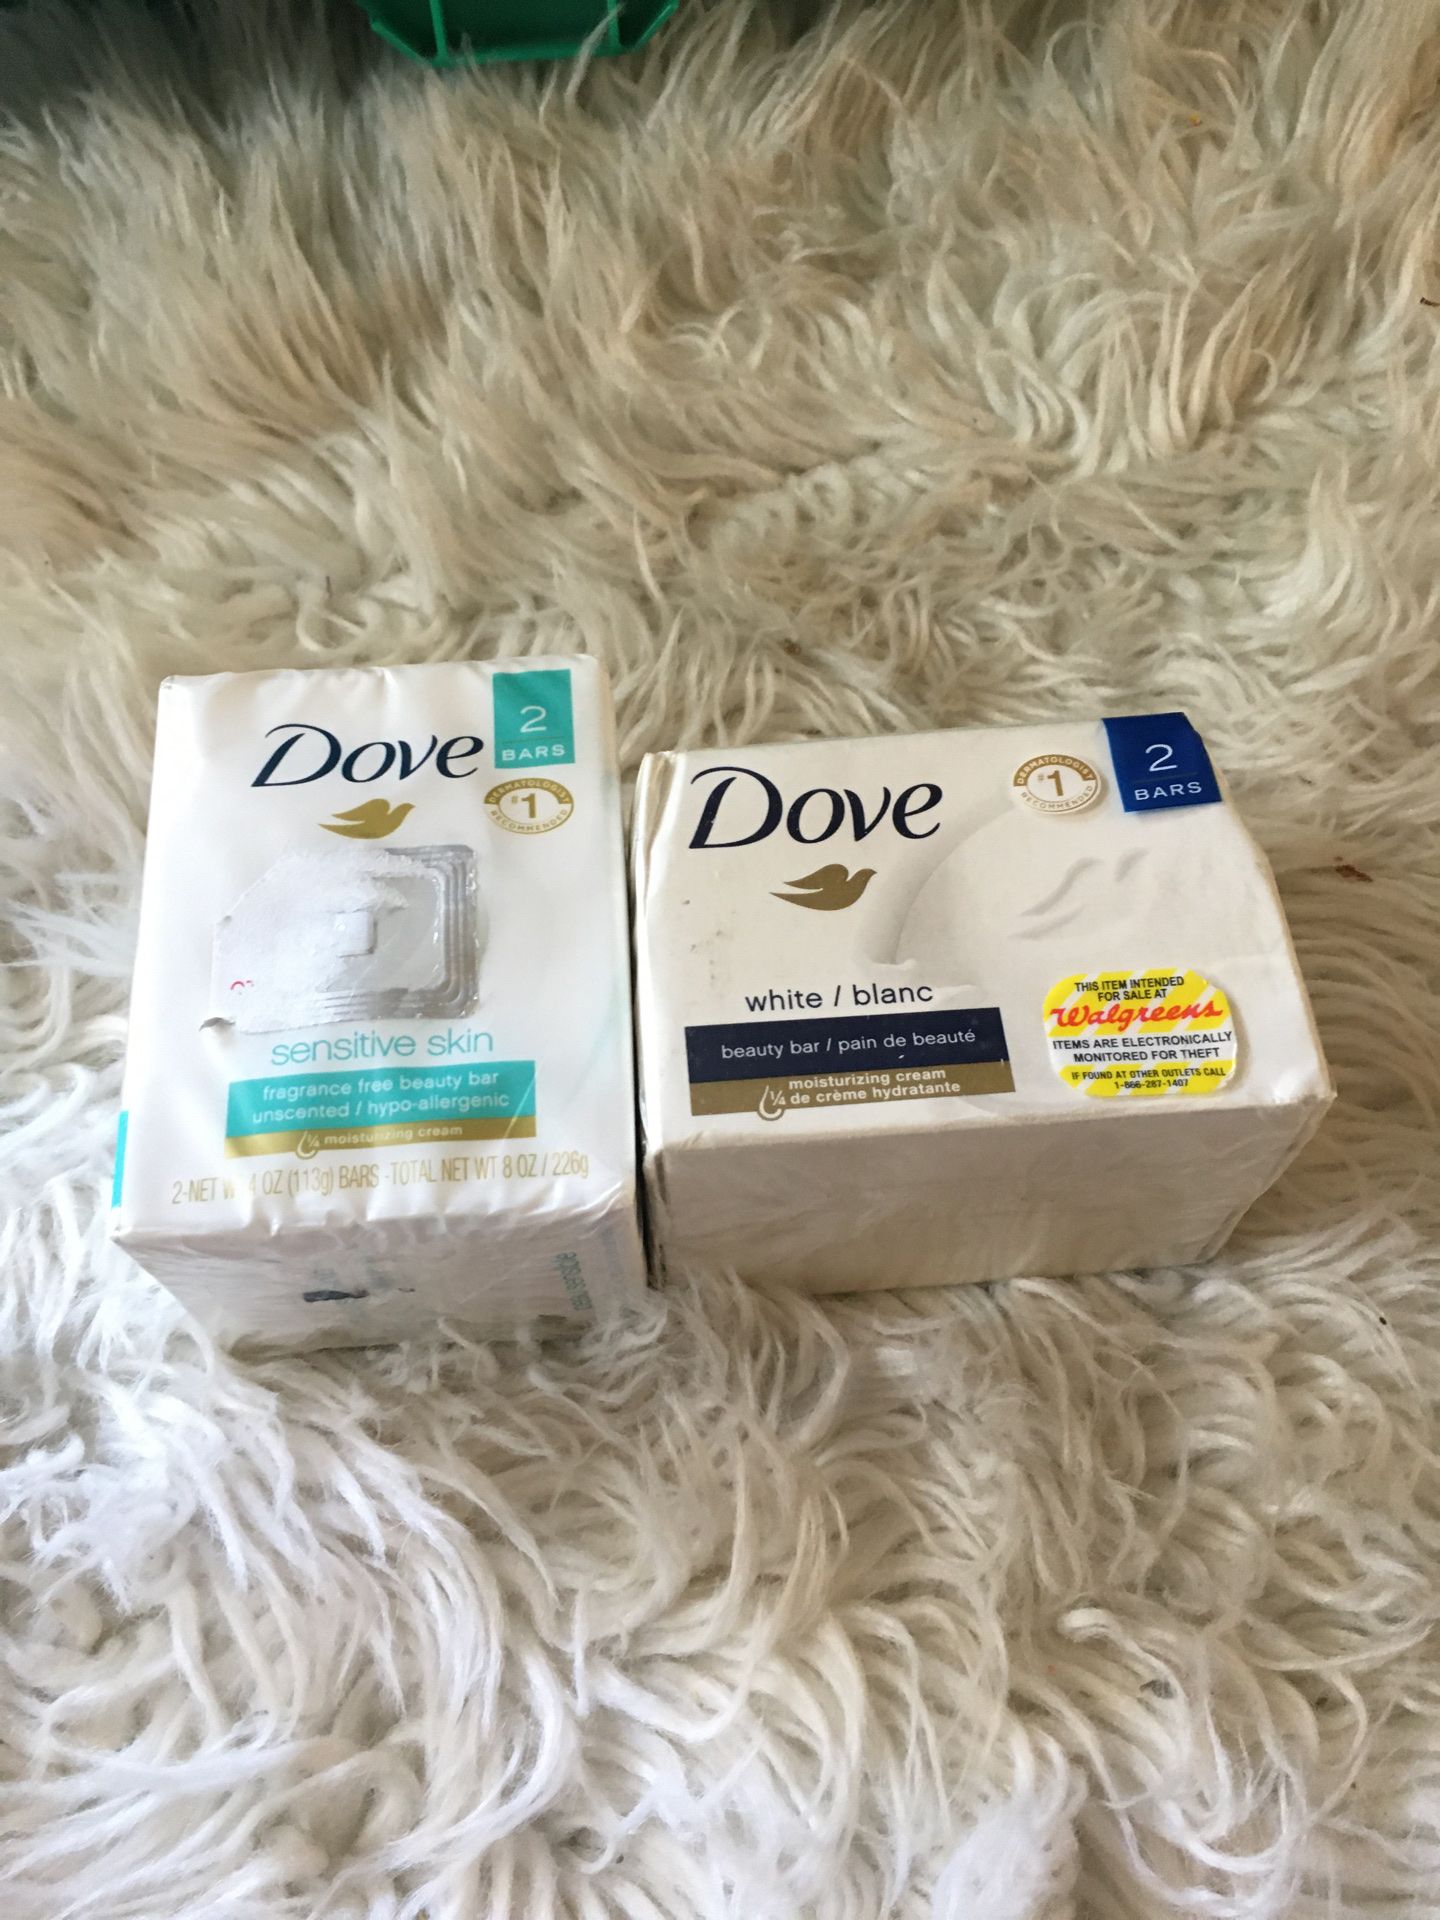 2 Packs of Dove for $5